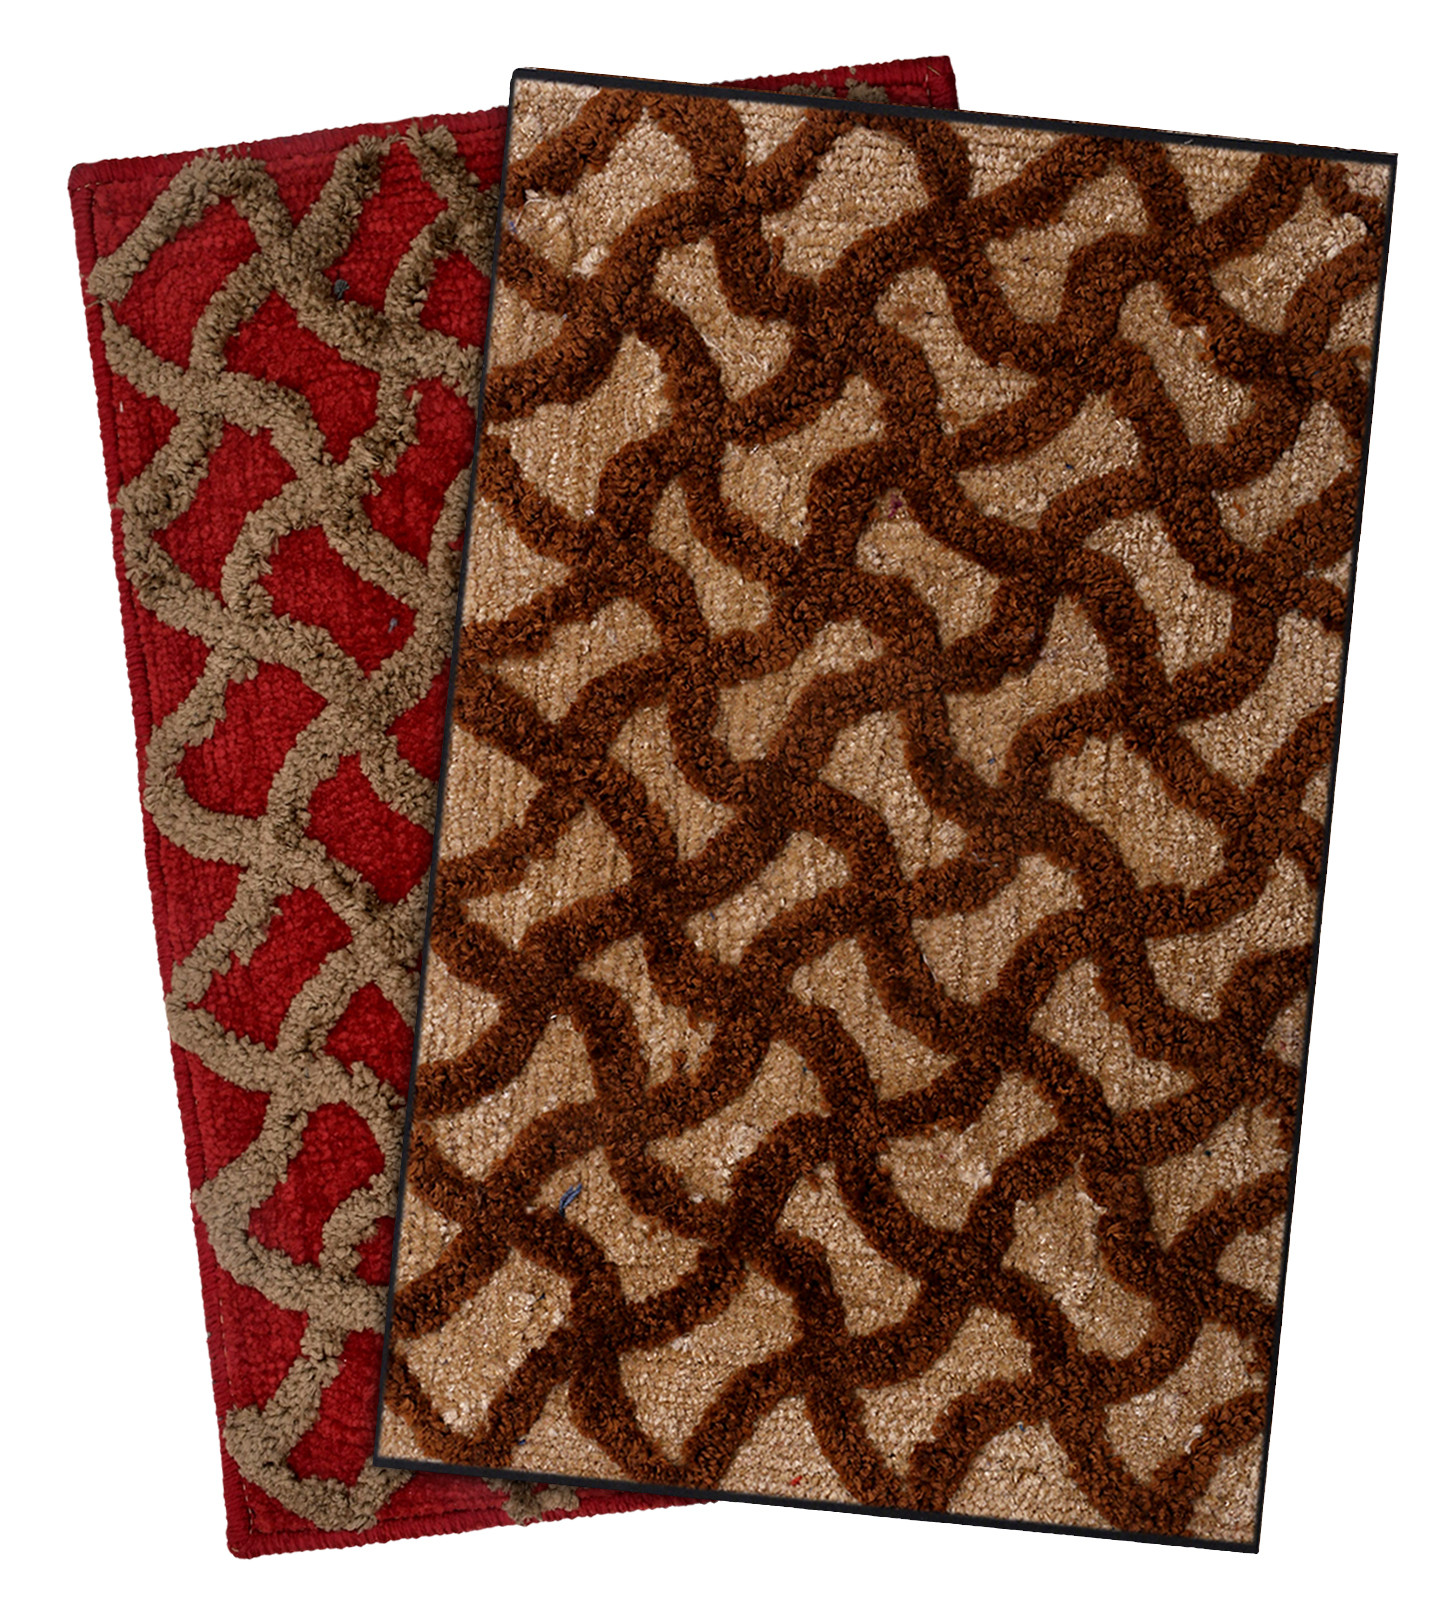 Kuber Industries Soft, lightweigth, Washable, Non Slip Doormat Entrance Rug Dirt Trapper Mat Shoes Scraper for Entry, Patio, Porch- Pack of 2 (Maroon & Brown )